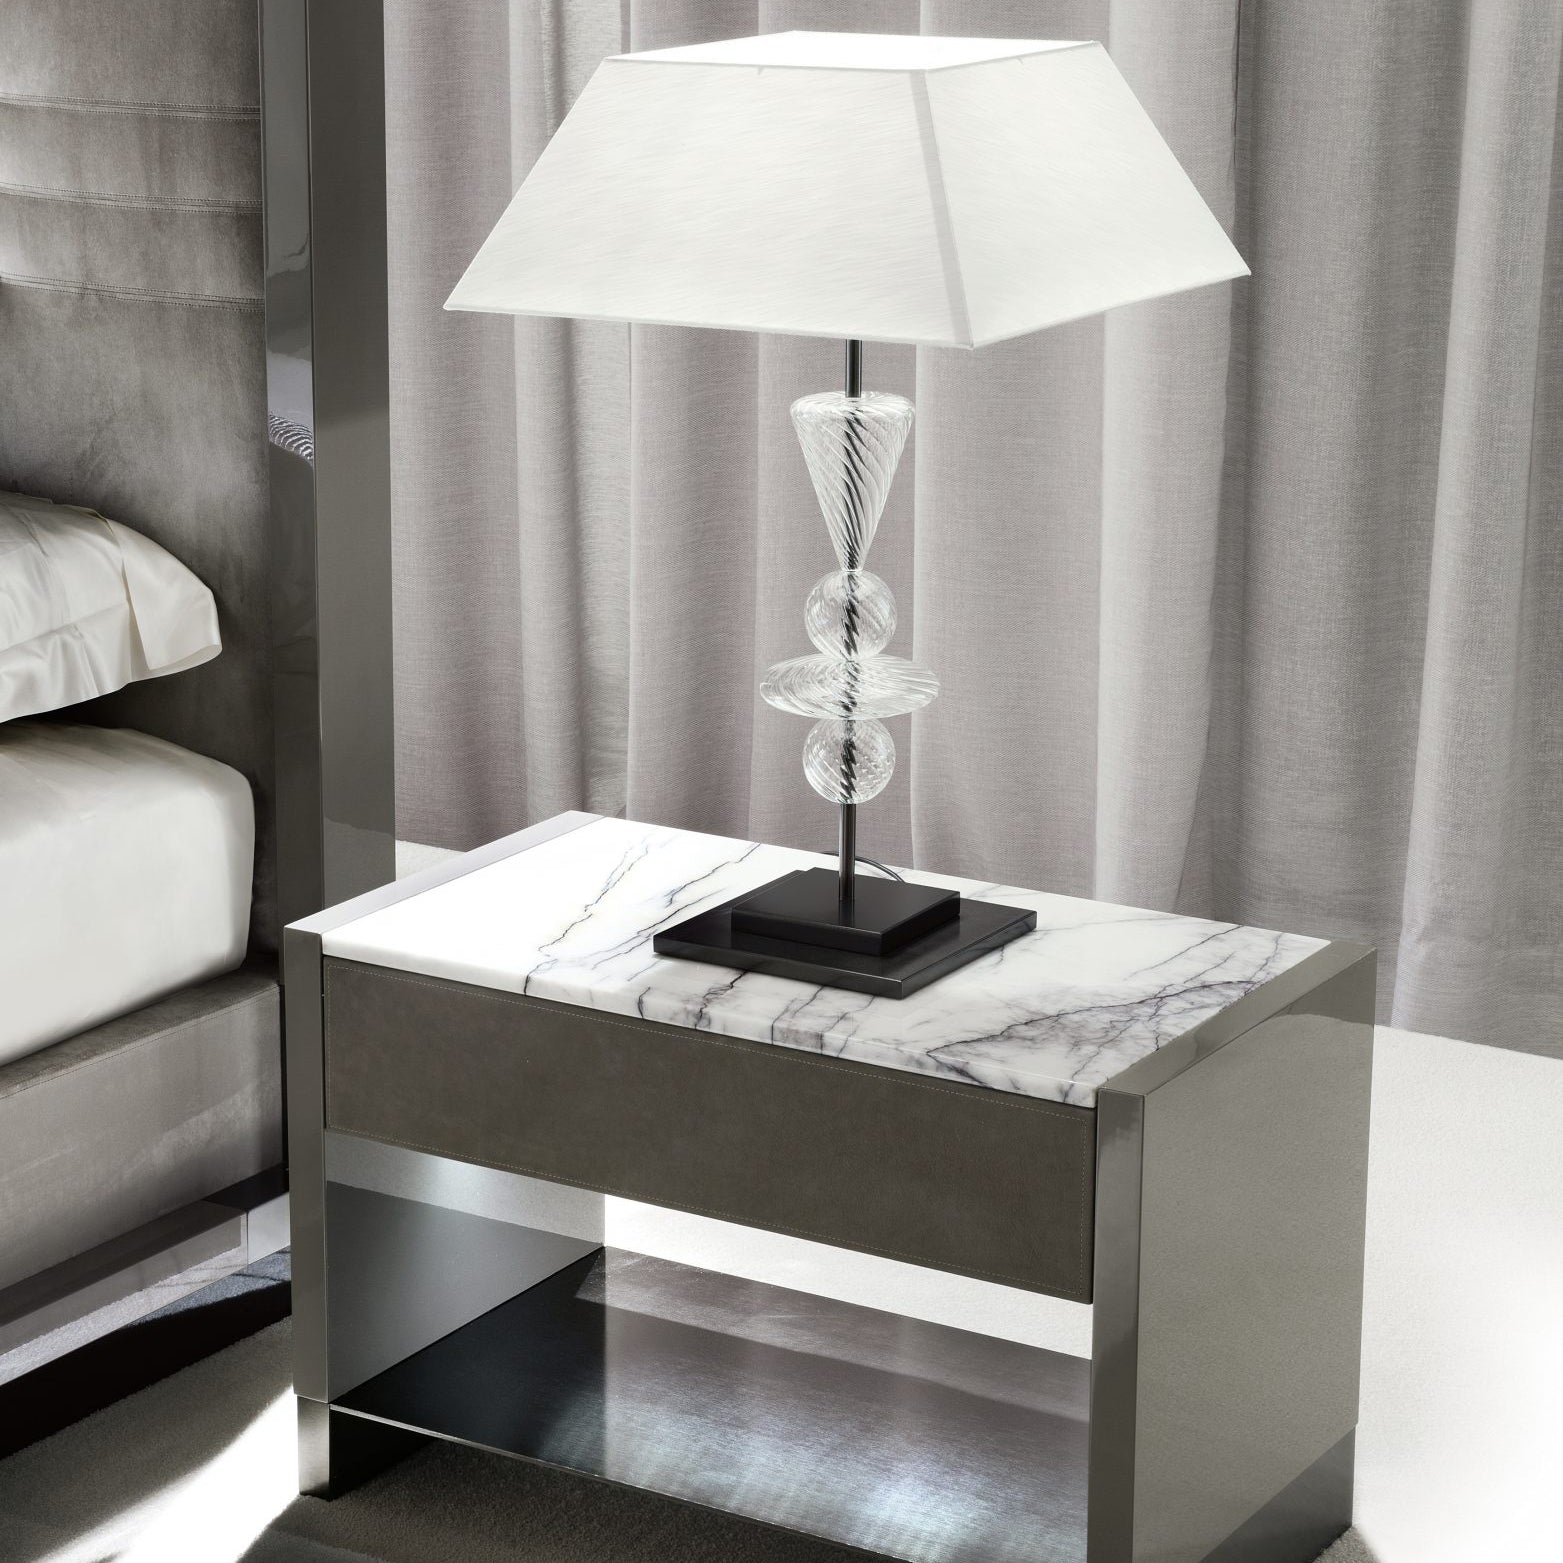 VISION table lamp1